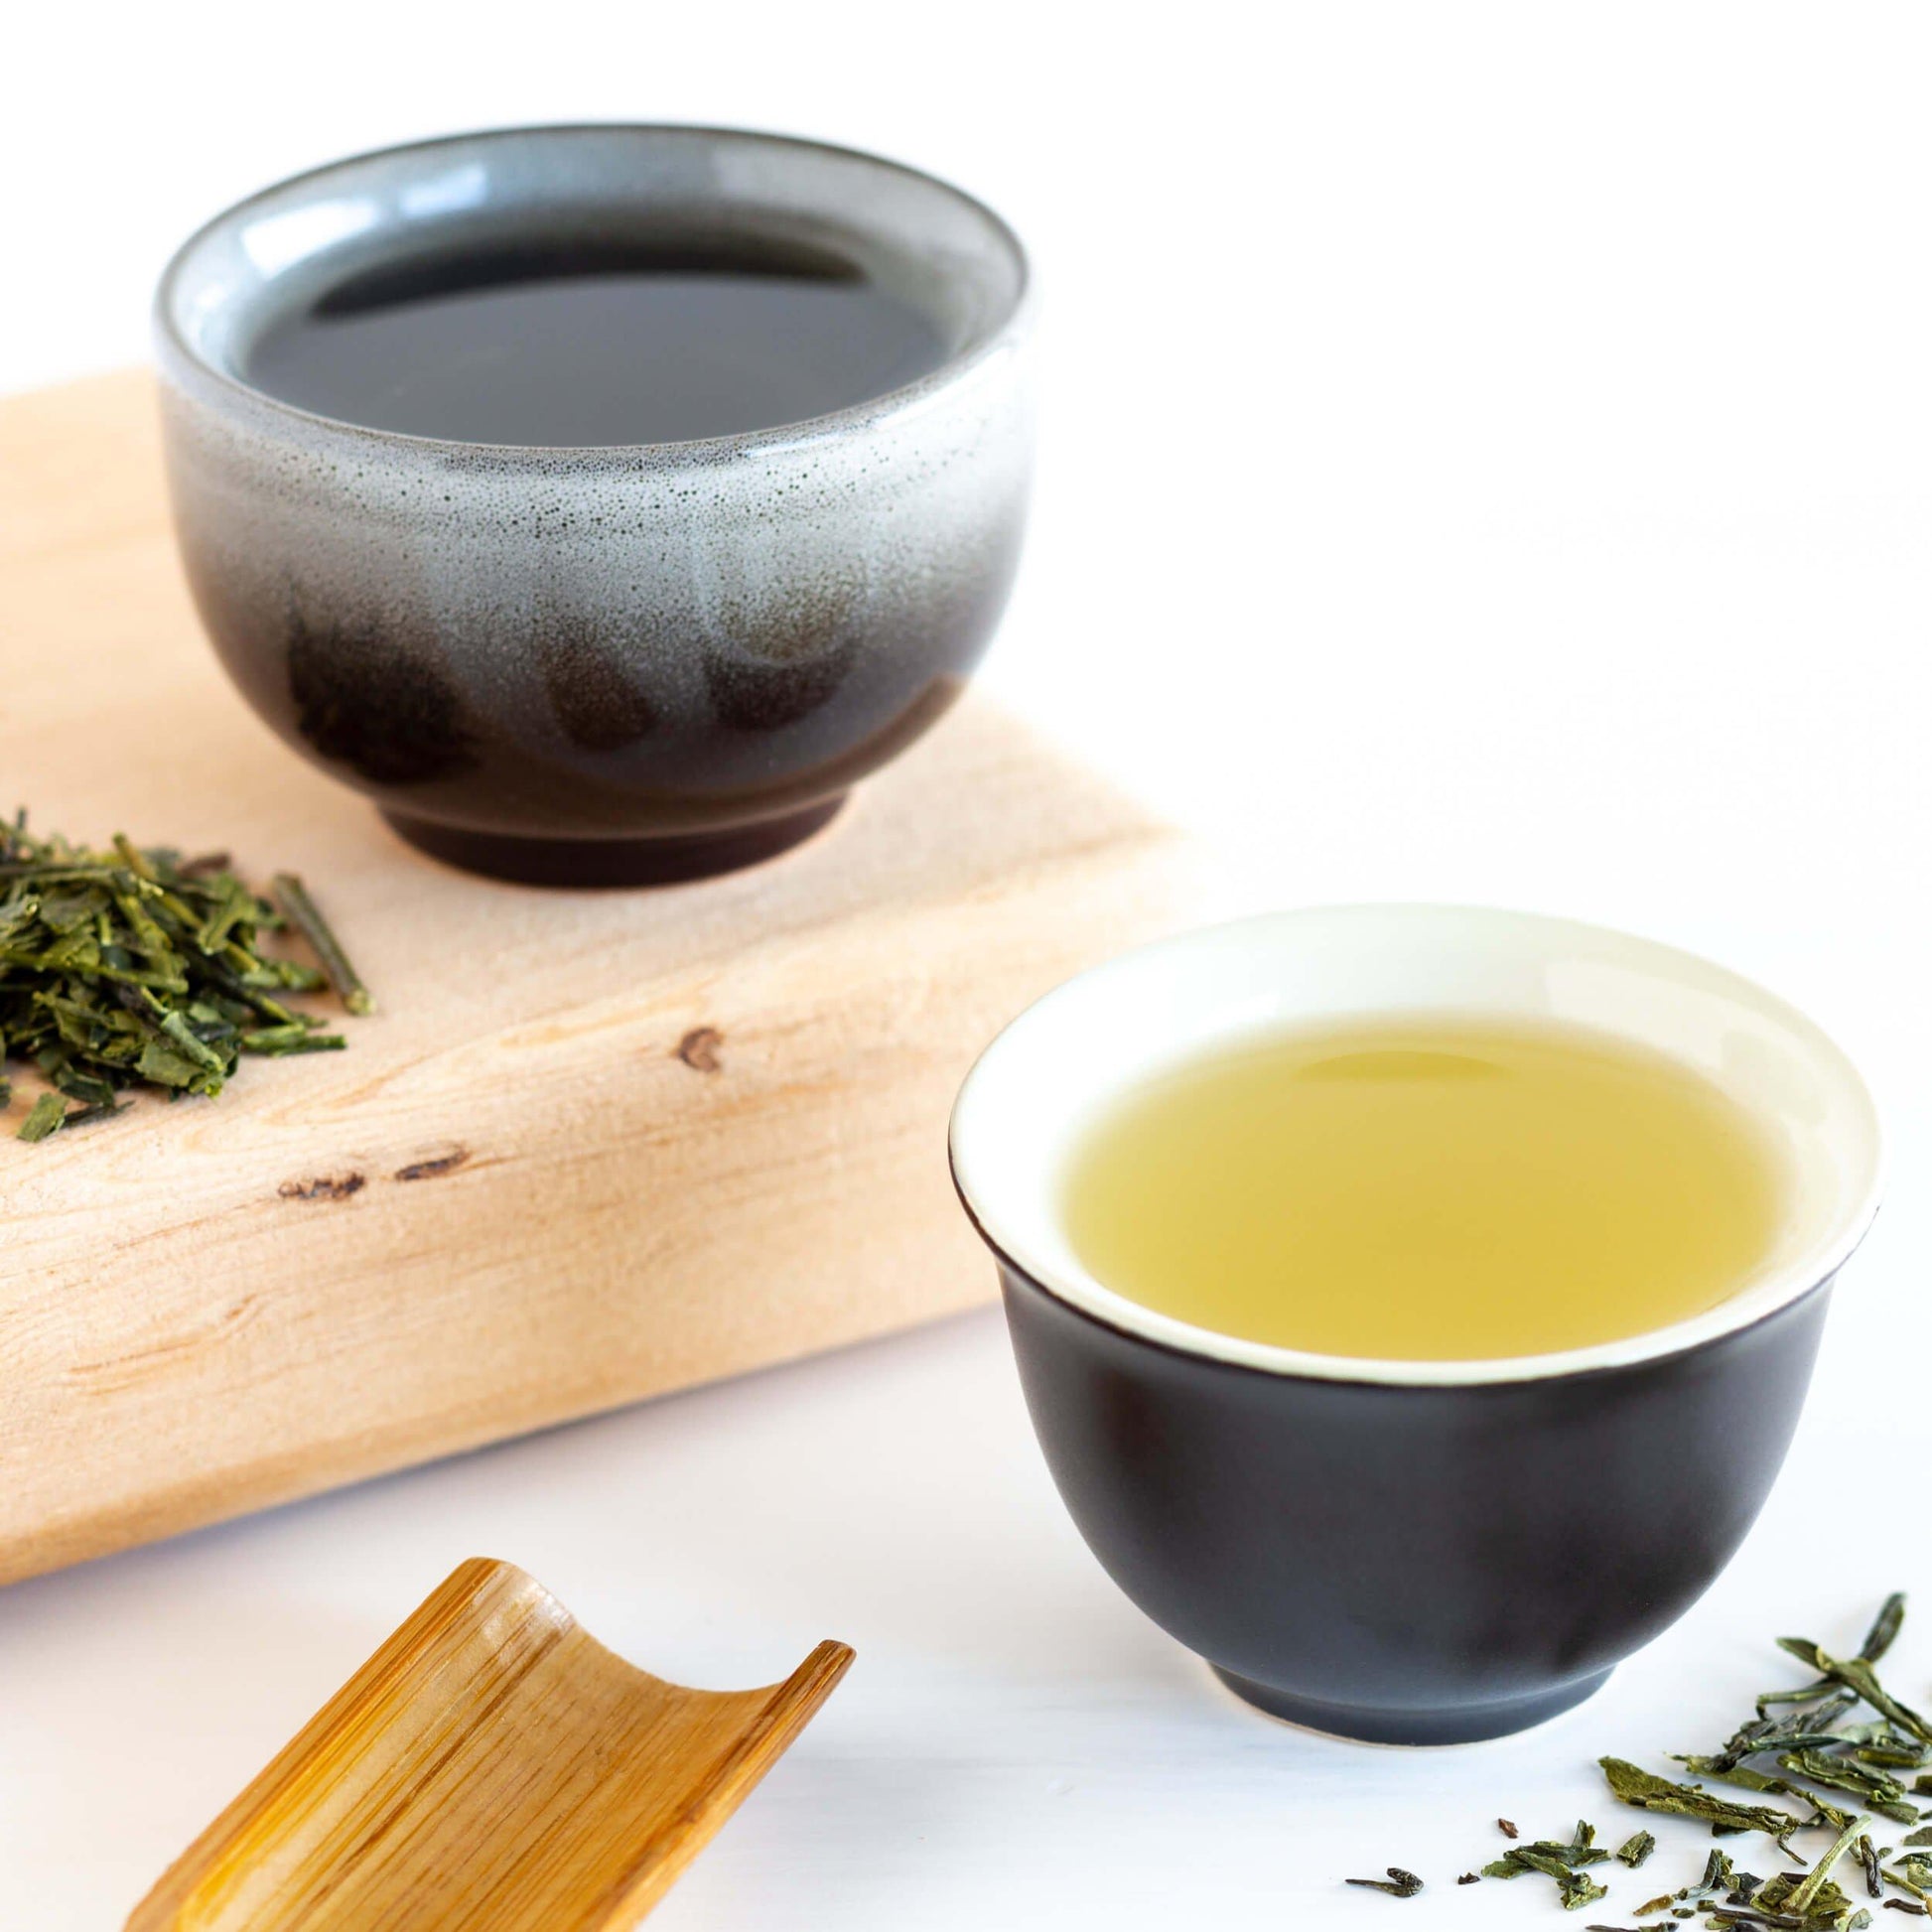 Bancha Organic Green Tea shown as brewed tea in two different small black teacups. One teacup has a gray glaze and is sitting on a wooden plank. Loose green tea leaves are nearby. A wooden scoop is in the foreground.